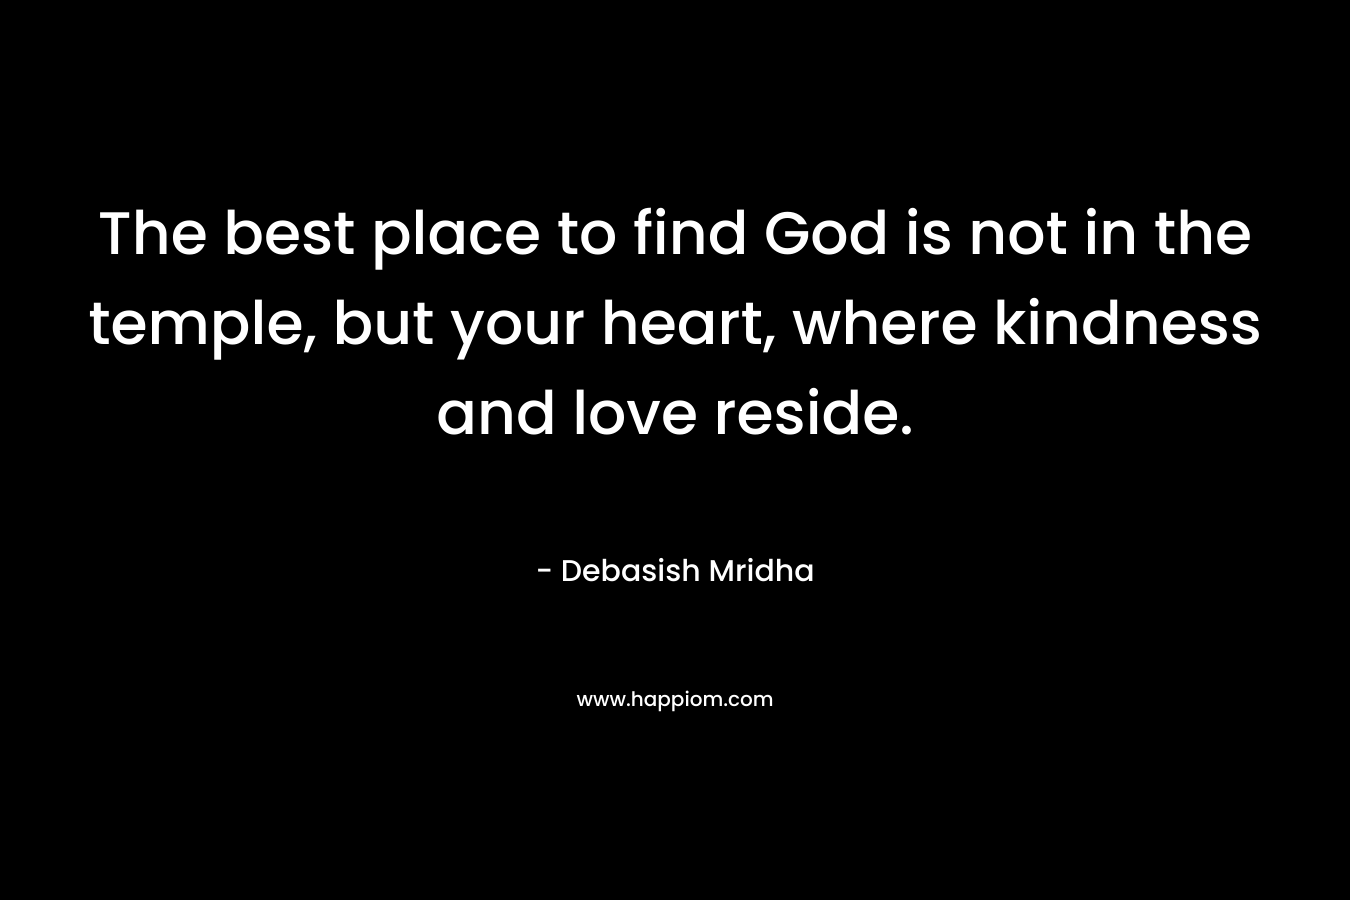 The best place to find God is not in the temple, but your heart, where kindness and love reside.